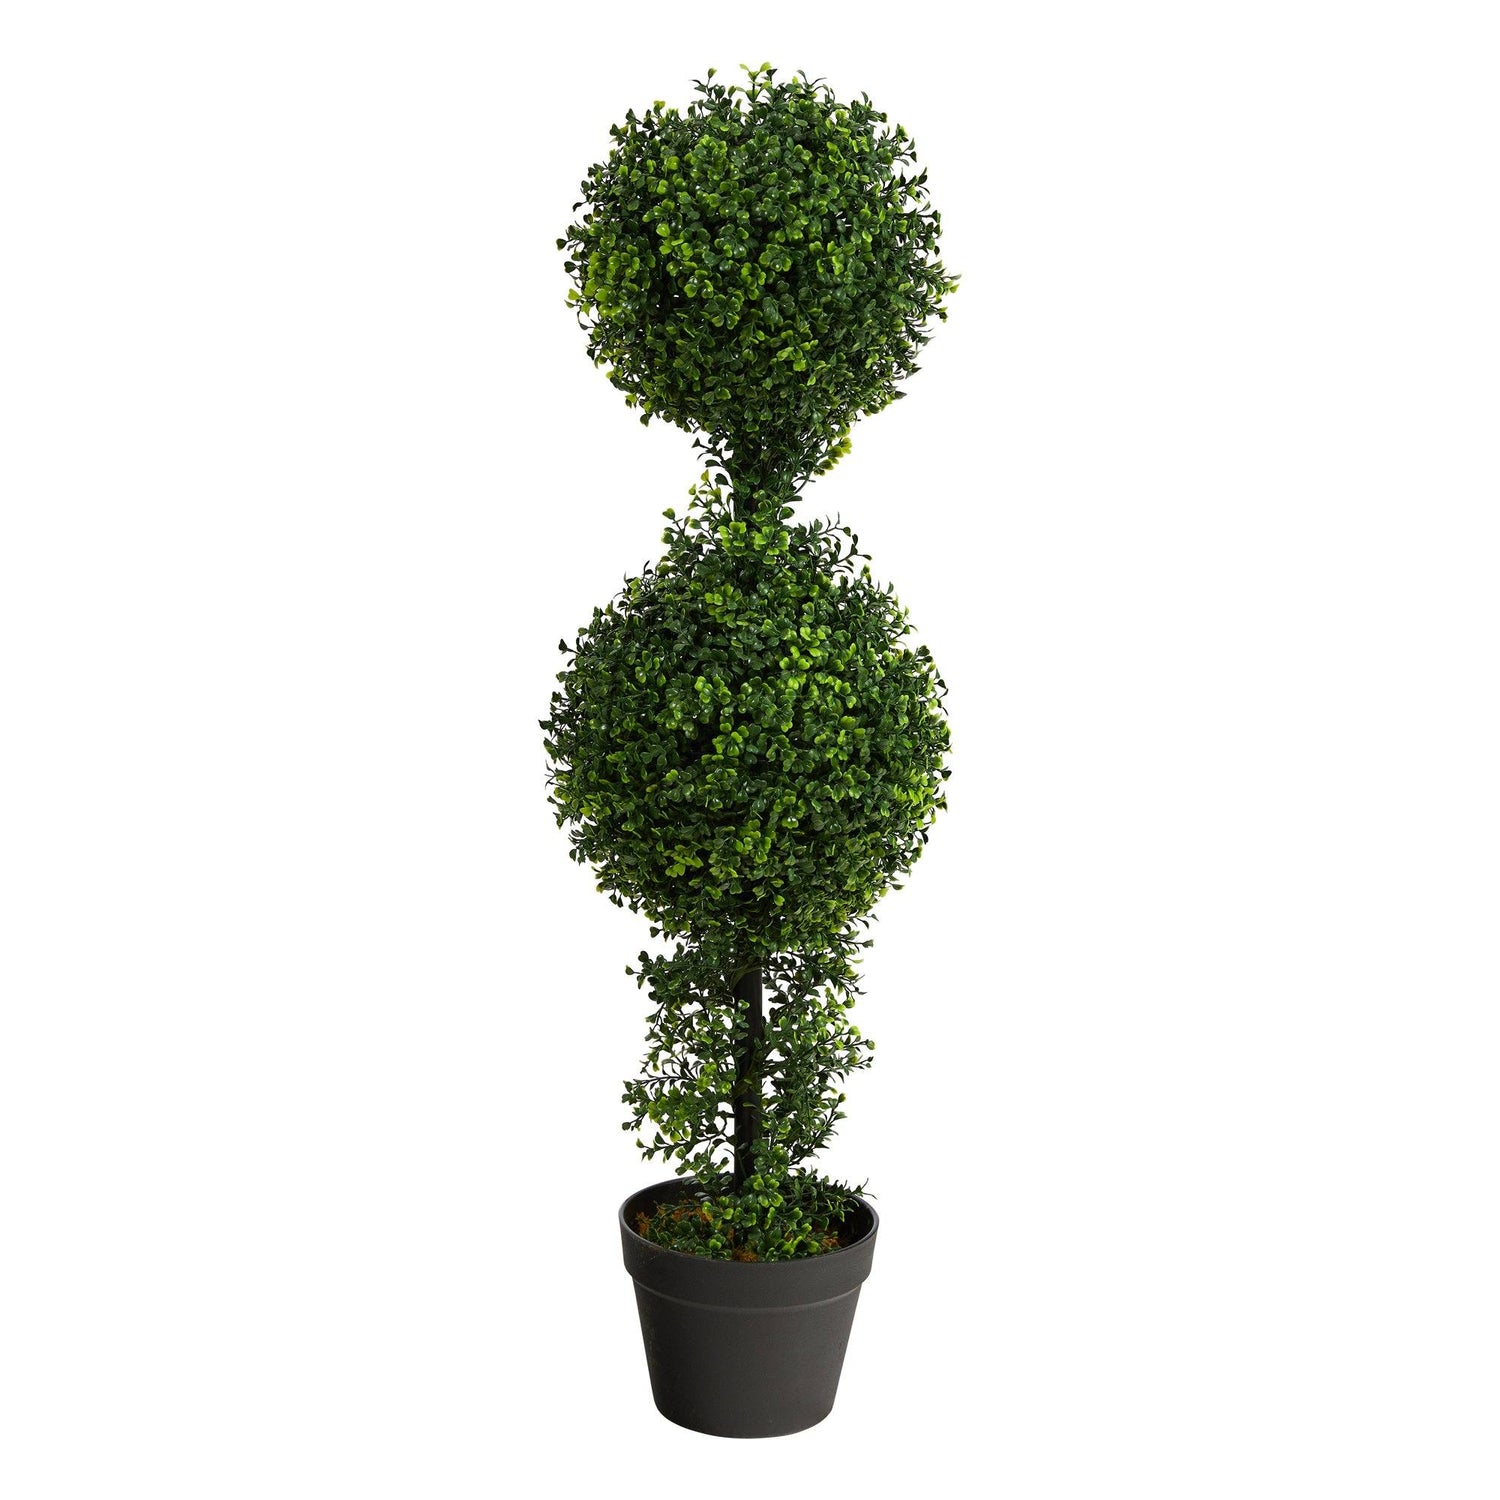 34” Boxwood Double Ball Topiary Artificial Tree (Indoor/Outdoor)